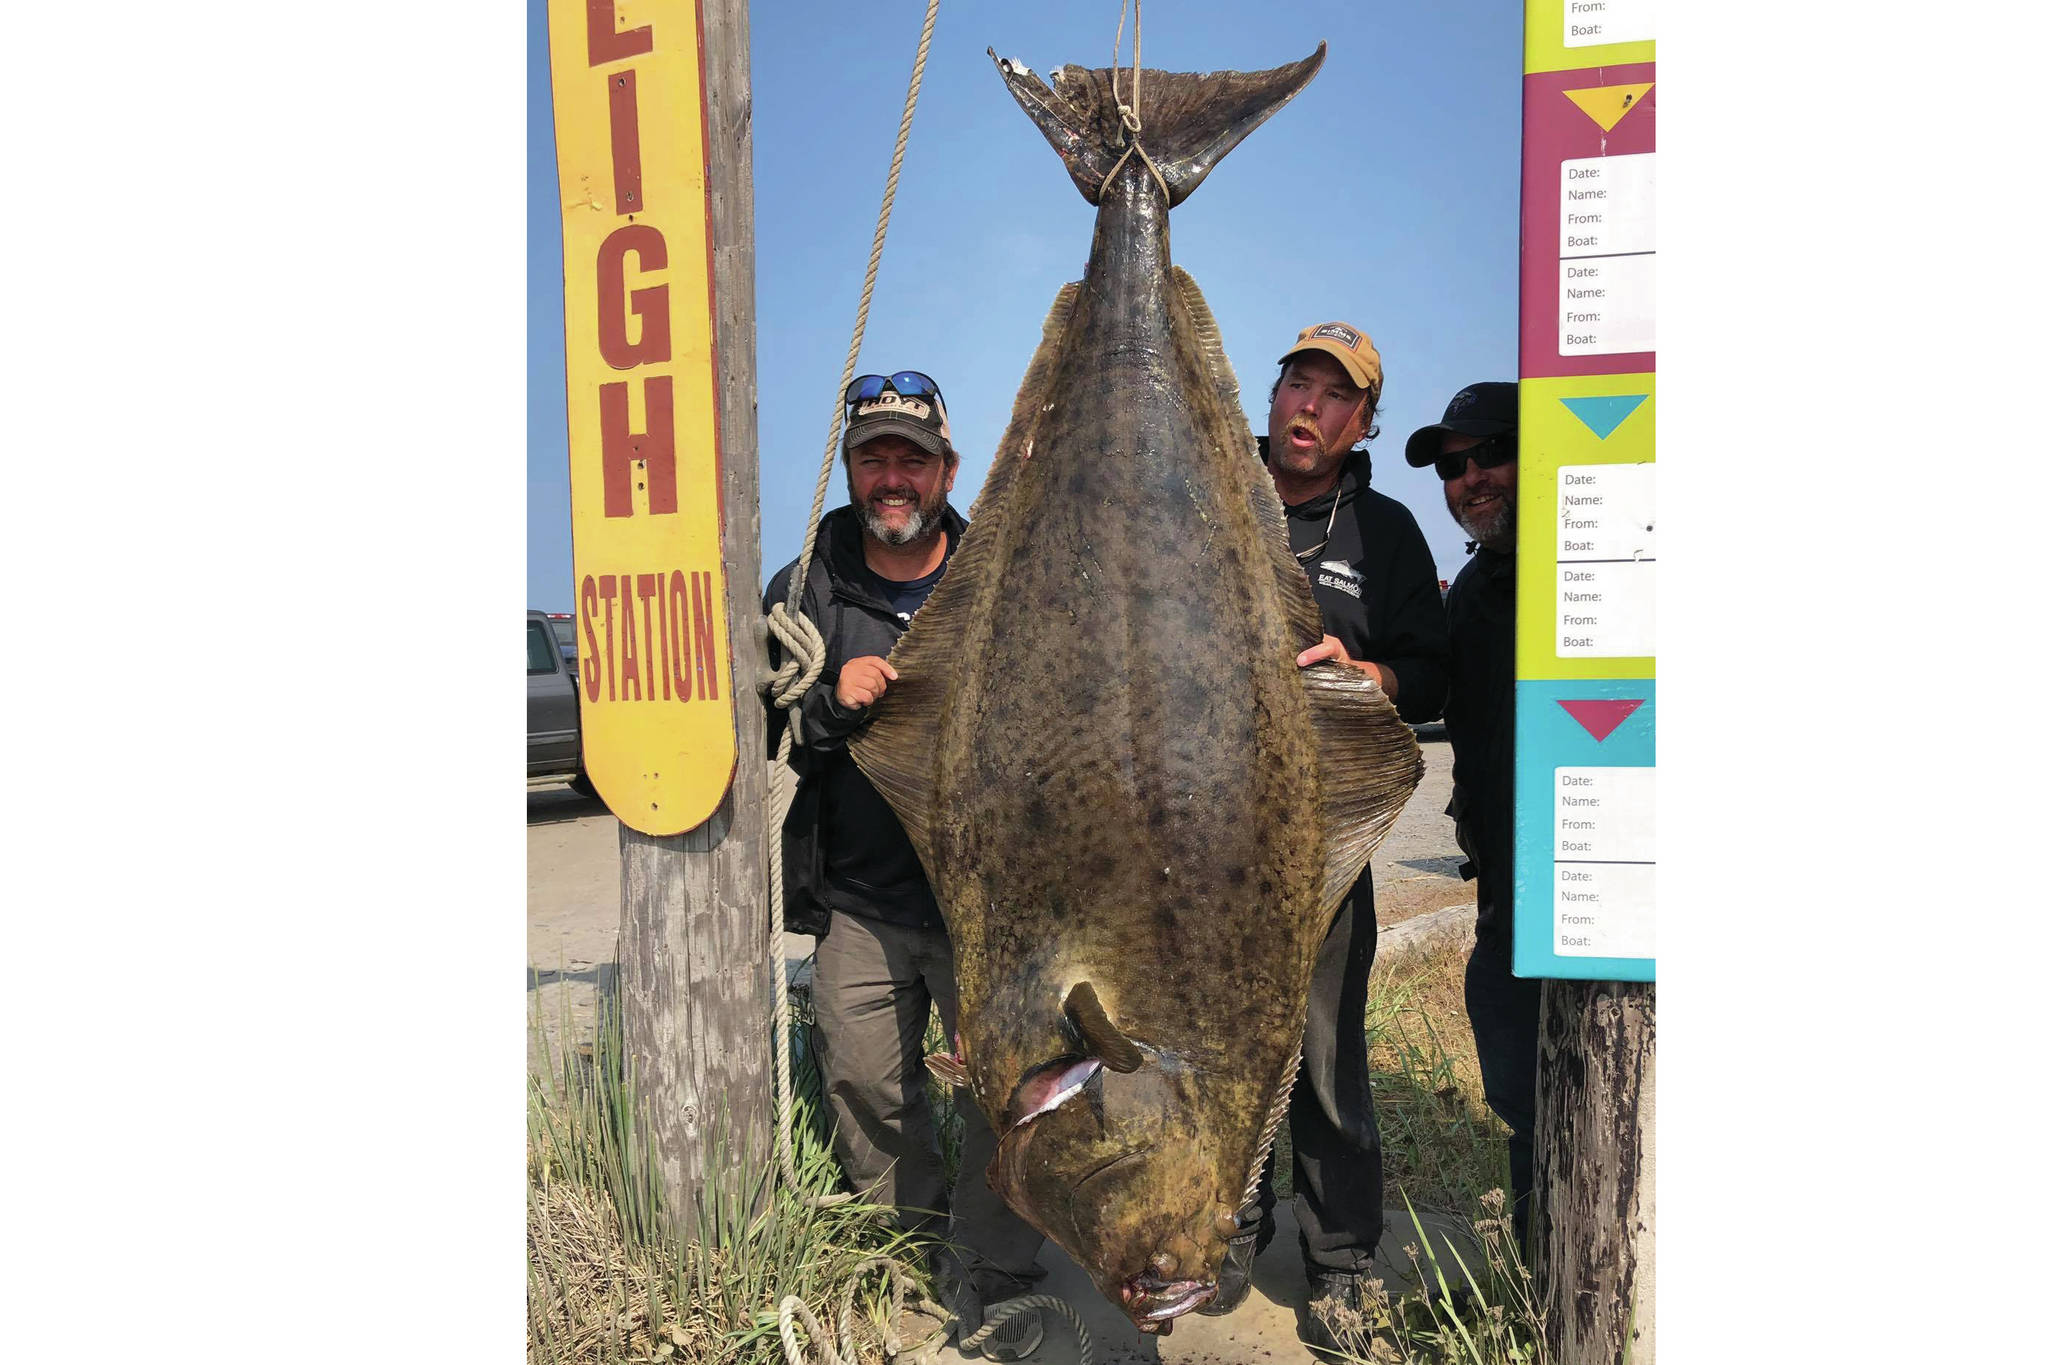 Homer Jackpot Halibut Derby winner Jason Schuler, left, of Wahpeton, North Dakota, poses with his 224.2-pound fish on July 12, 2019, in Homer, Alaska. To the right of the fish is Captain Daniel Donich of Daniel’s Personalized Guide Service. Schuler caught the fish on Donich’s boat, the Optimist. (Photo provided)